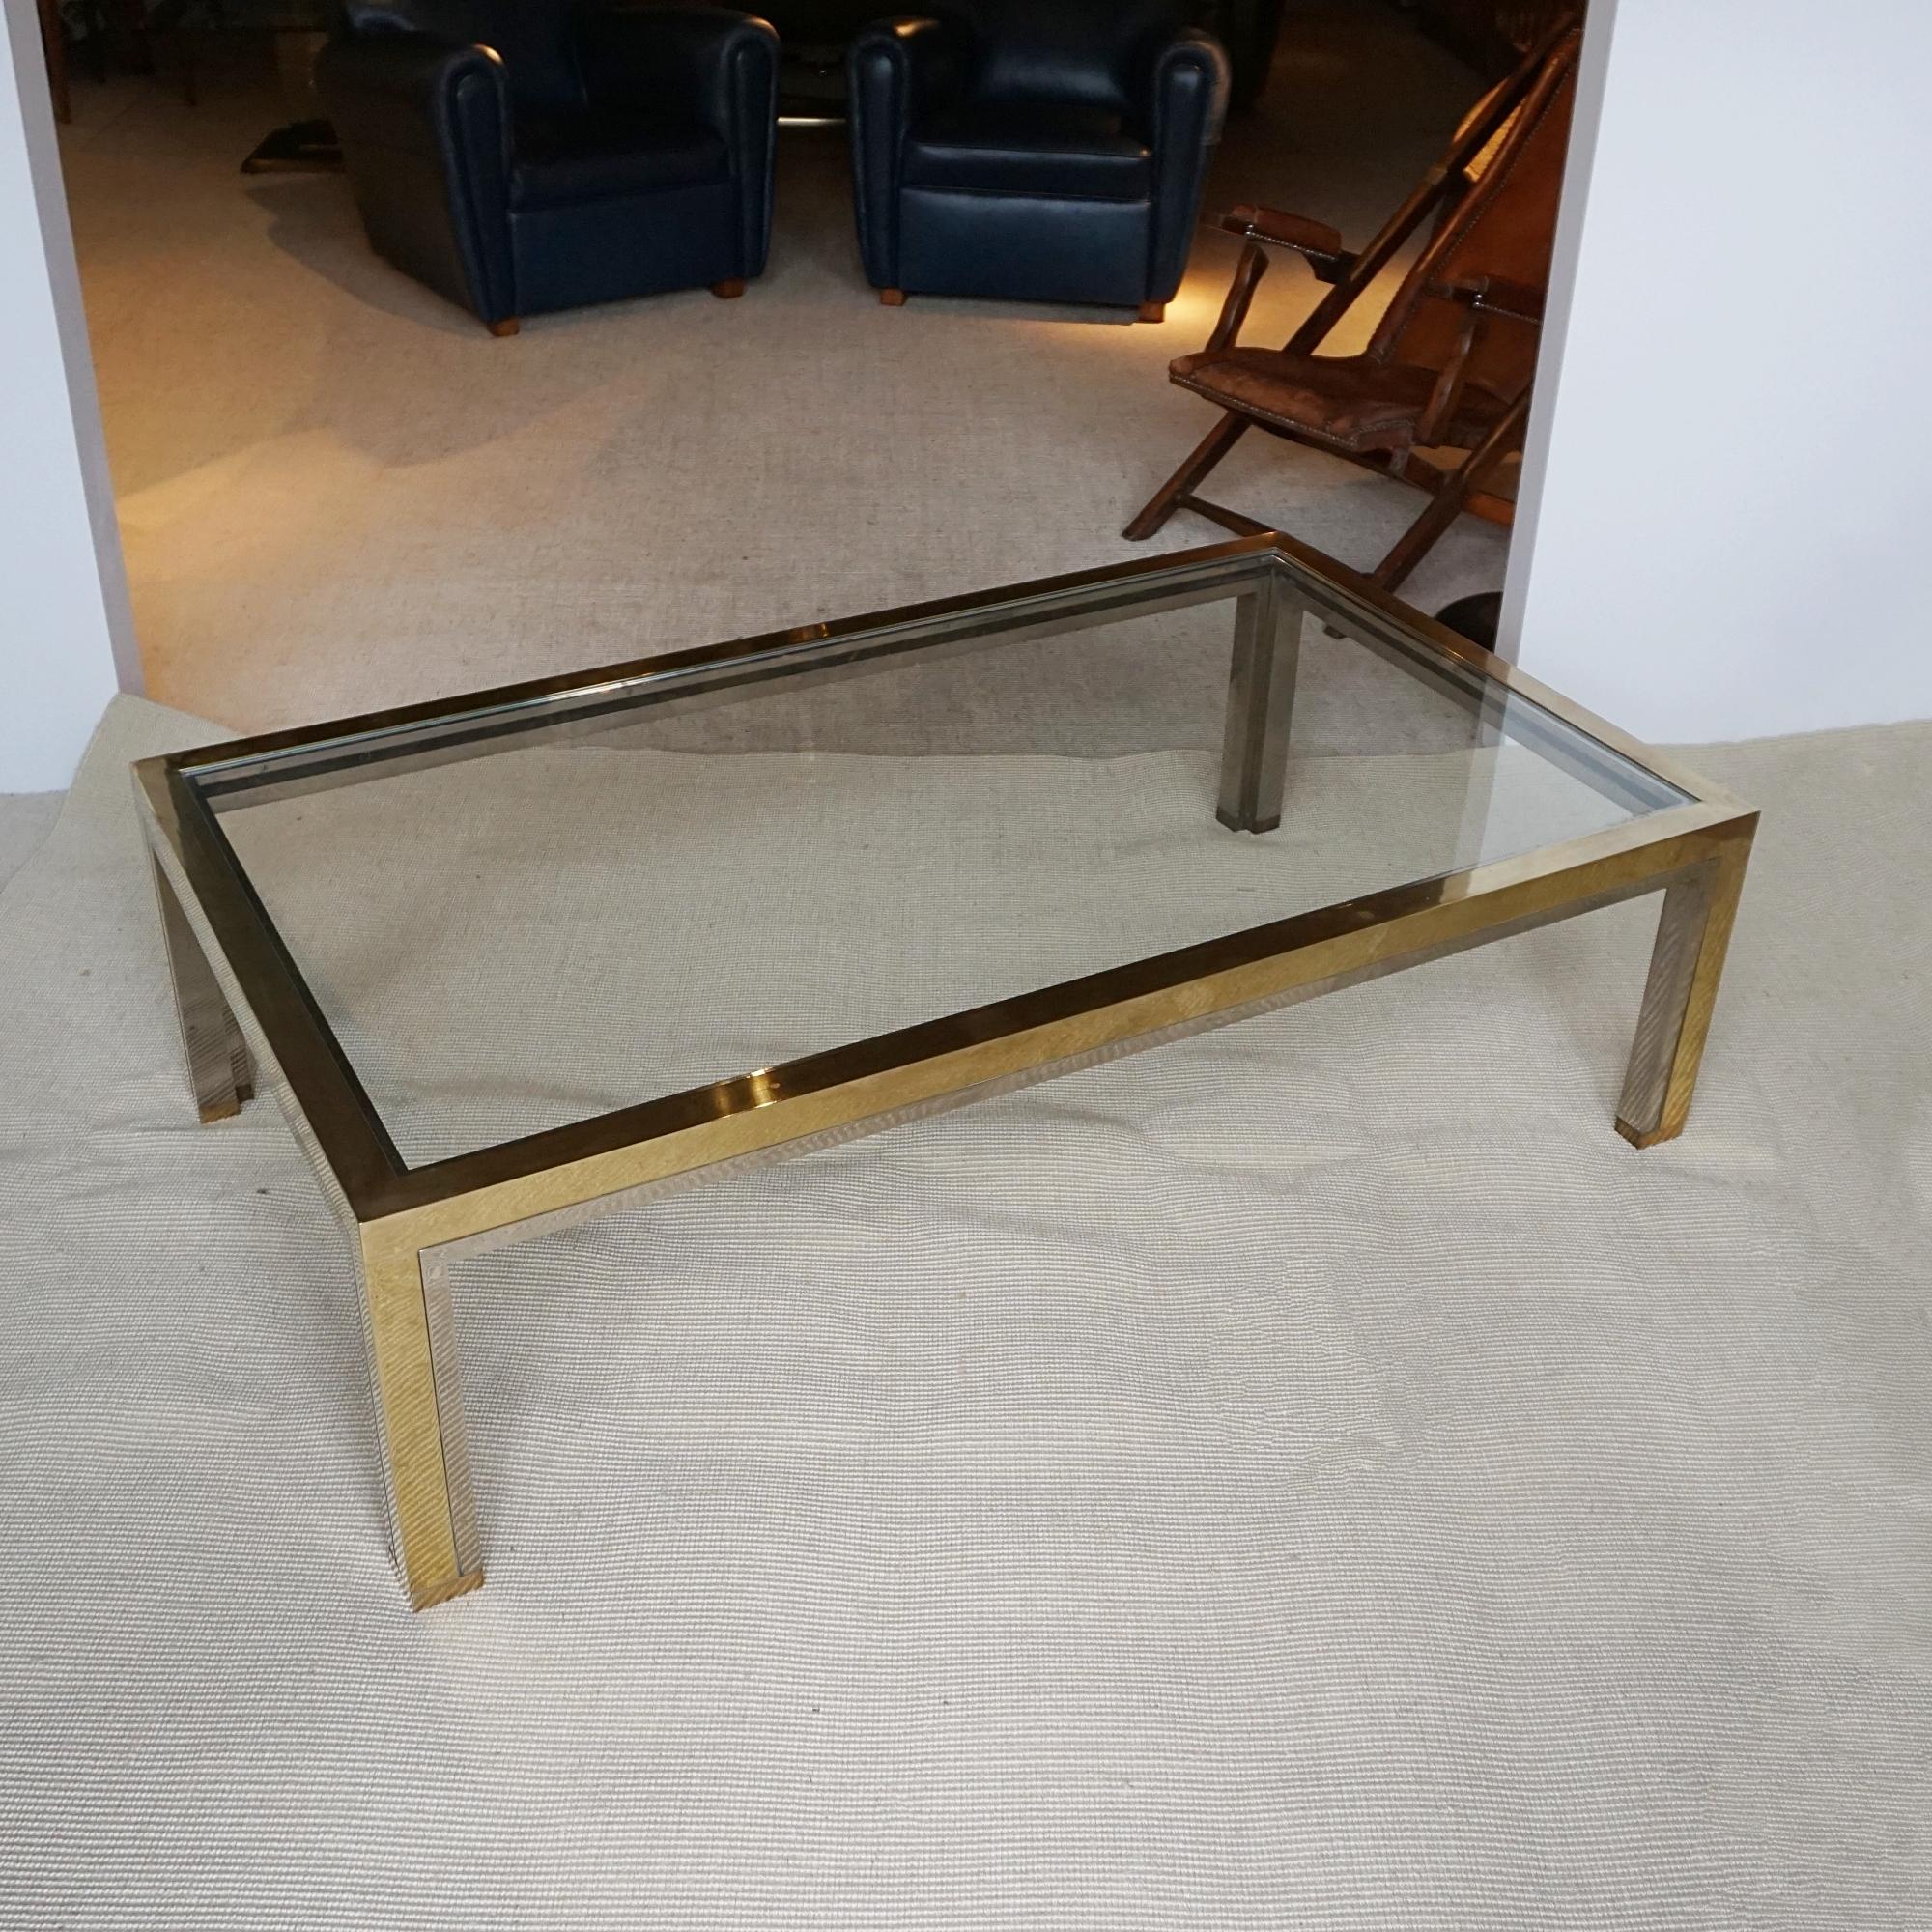 Large Modernist Italian Designed Coffee Table by Romeo Rega (1925-1981) In Good Condition For Sale In Forest Row, East Sussex